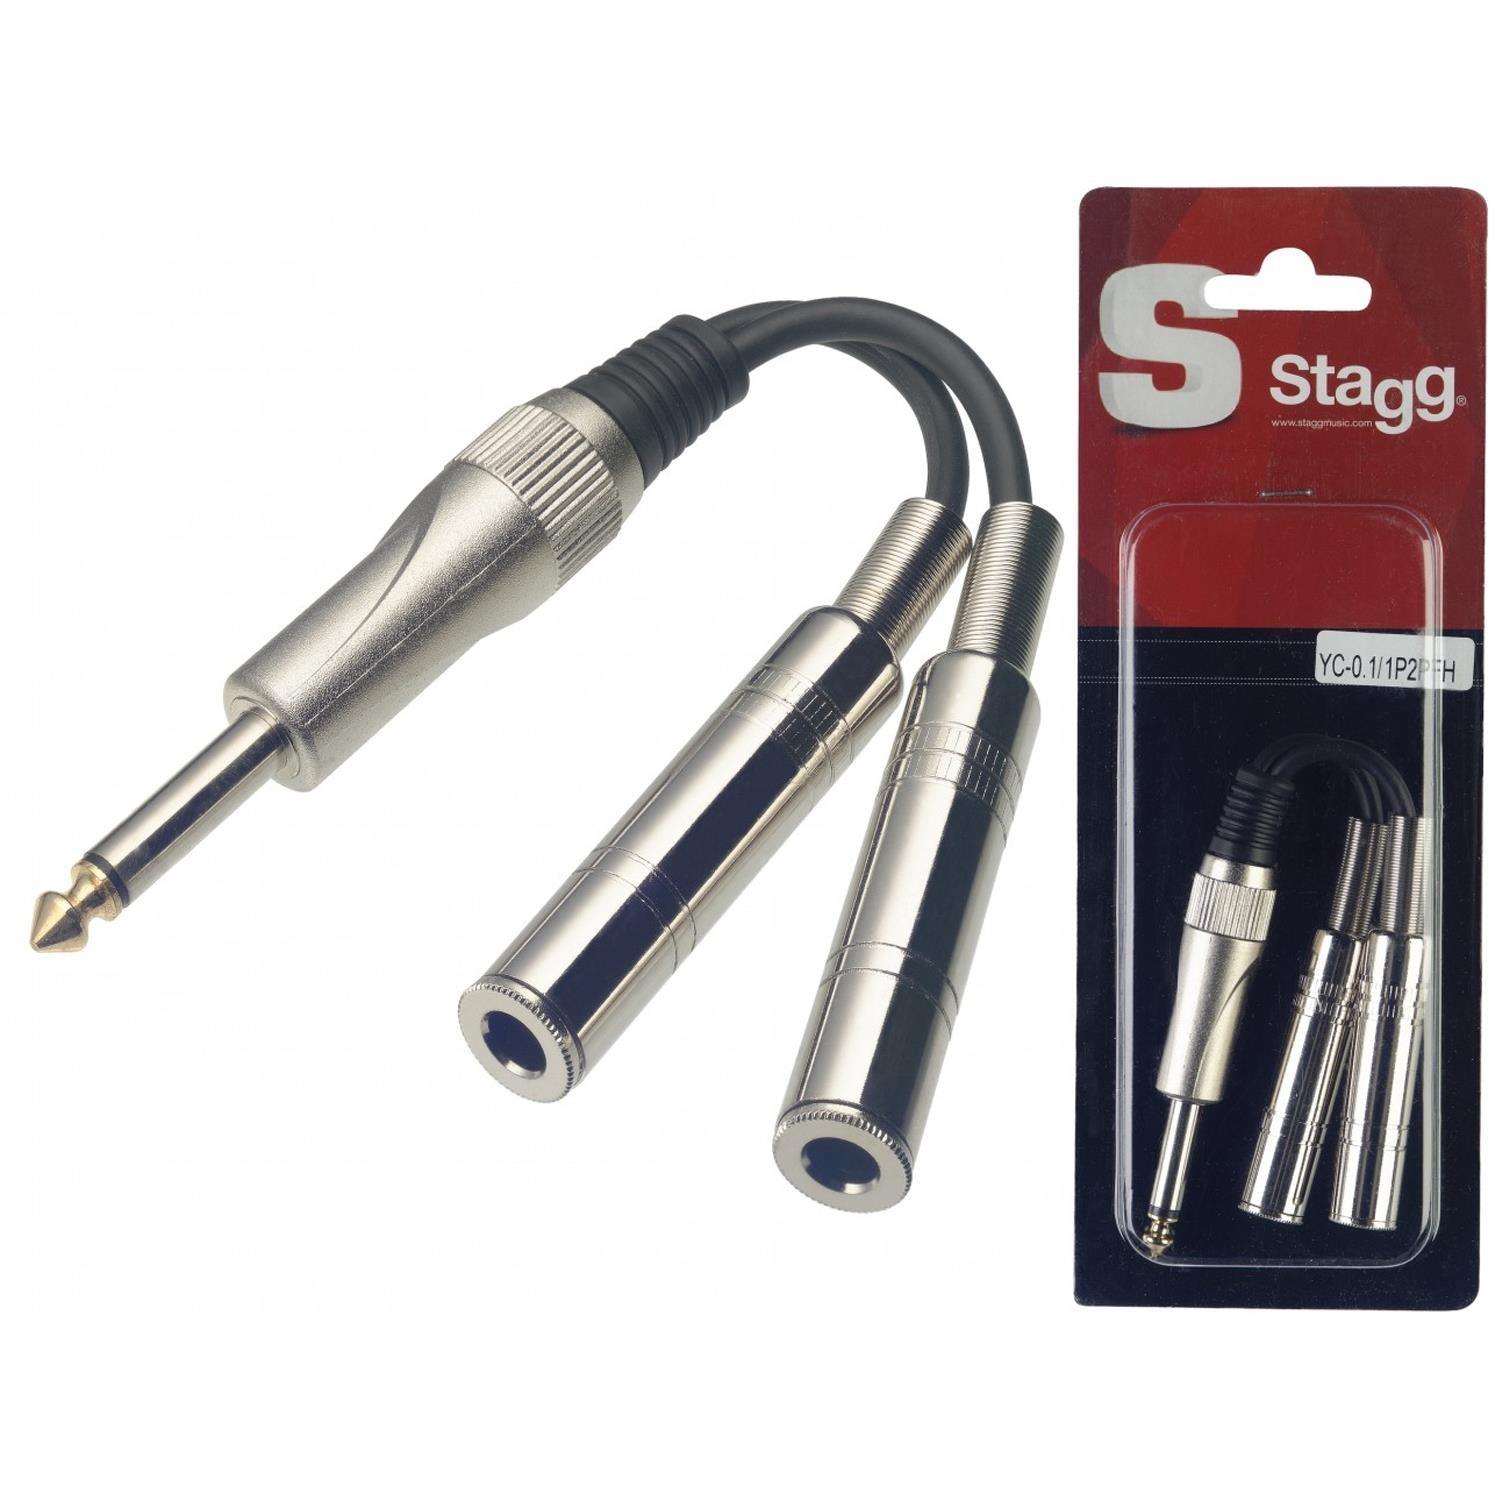 Stagg 1x Mono Jack to 2x Female Mono Plug Adapter Cable - DY Pro Audio